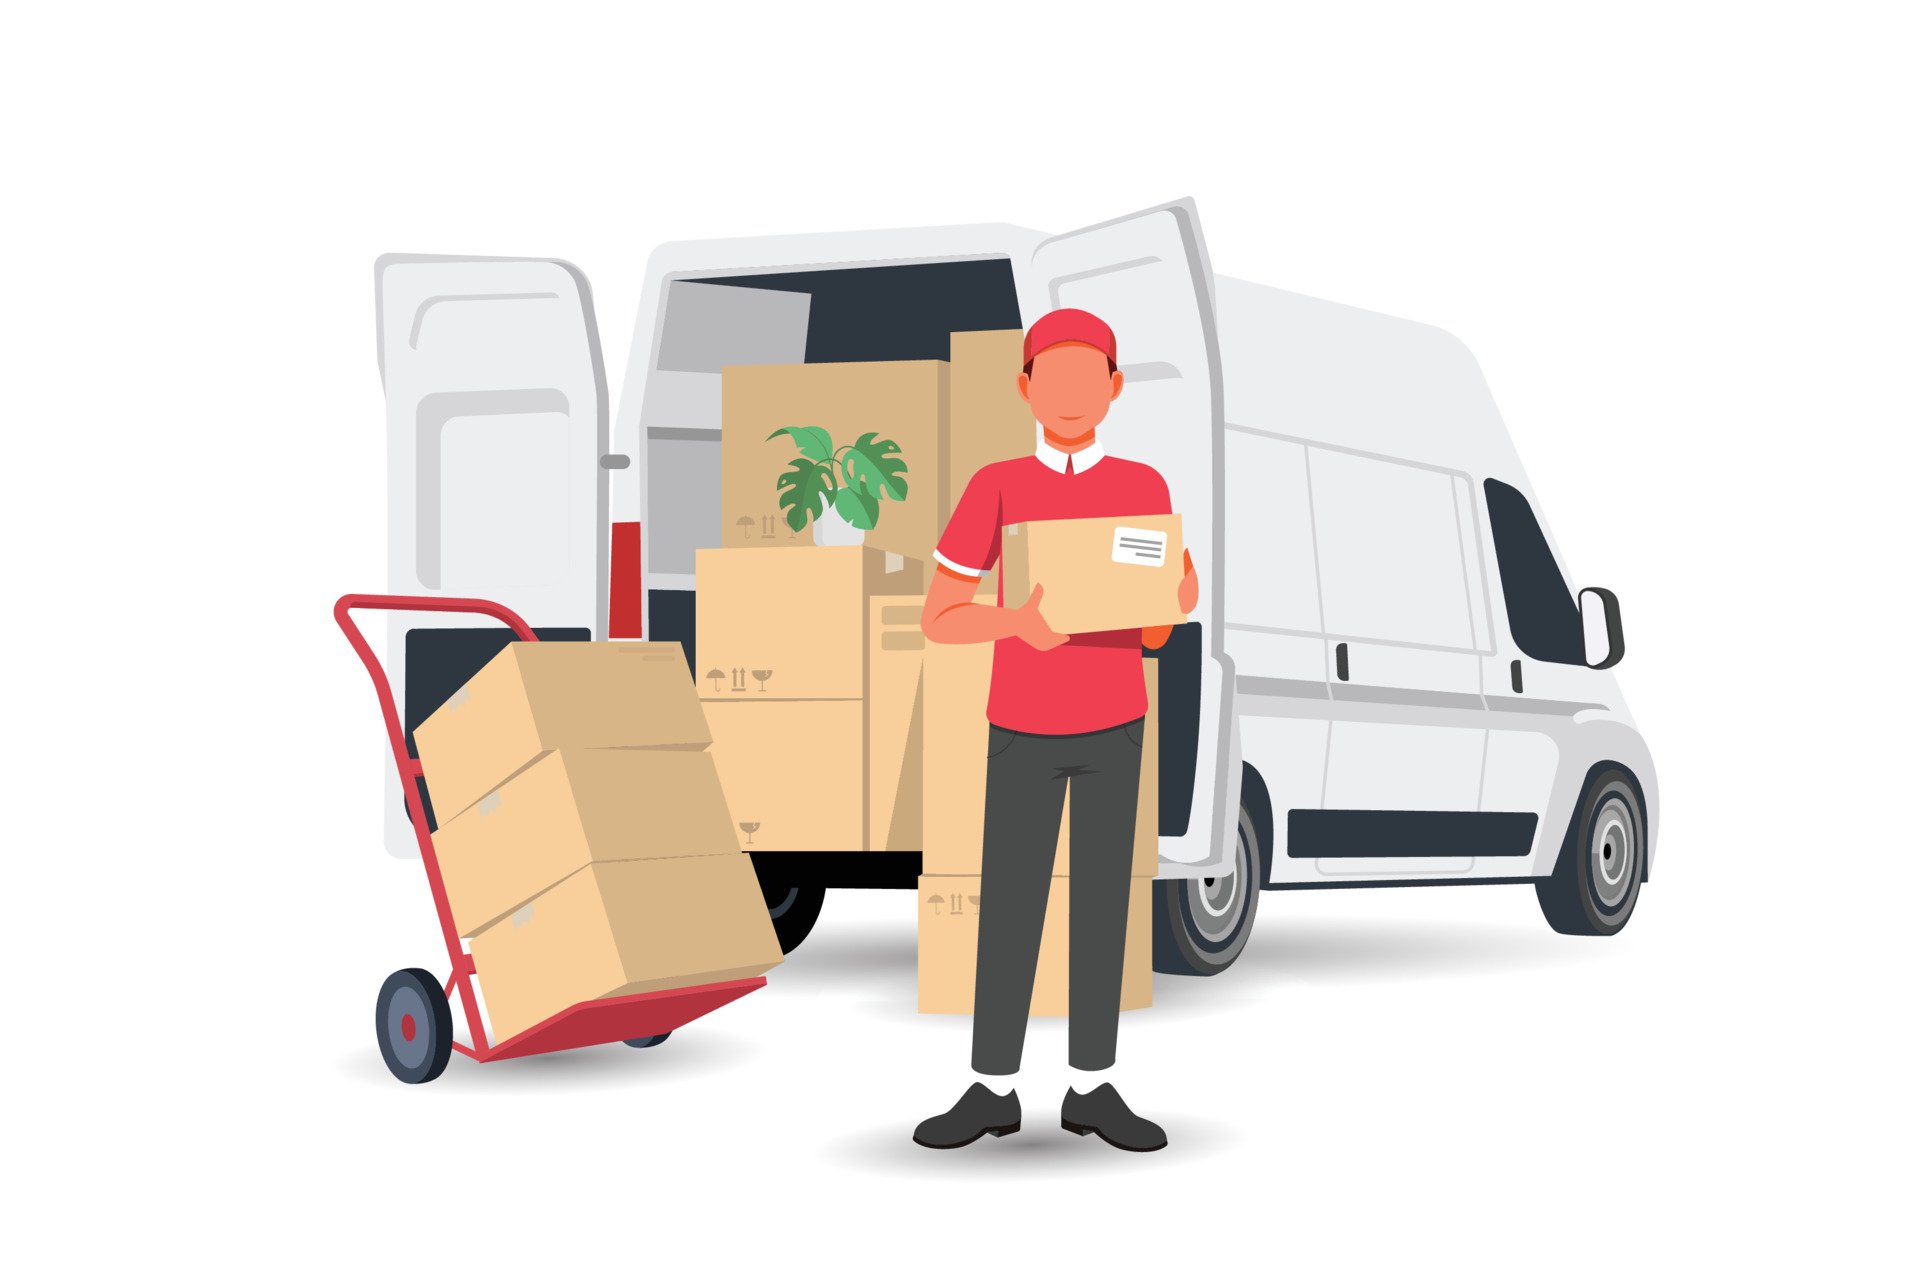 vecteezy_delivery-man-with-a-box-and-white-van-car-vector_7267454